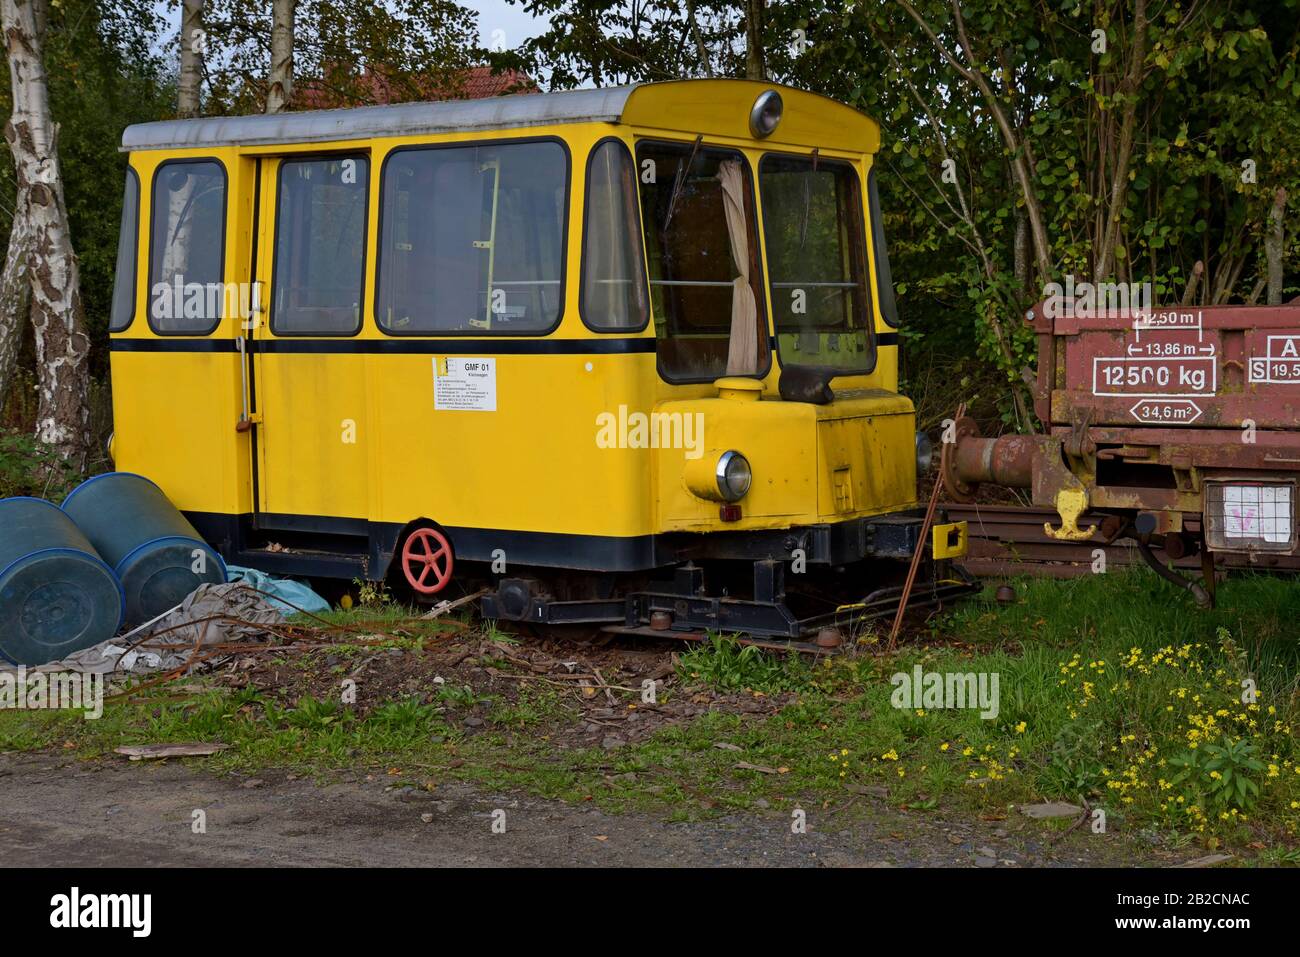 An unusual railway track maintenance personnel vehicle in the depot sidings at Bremervorde, Germany Stock Photo